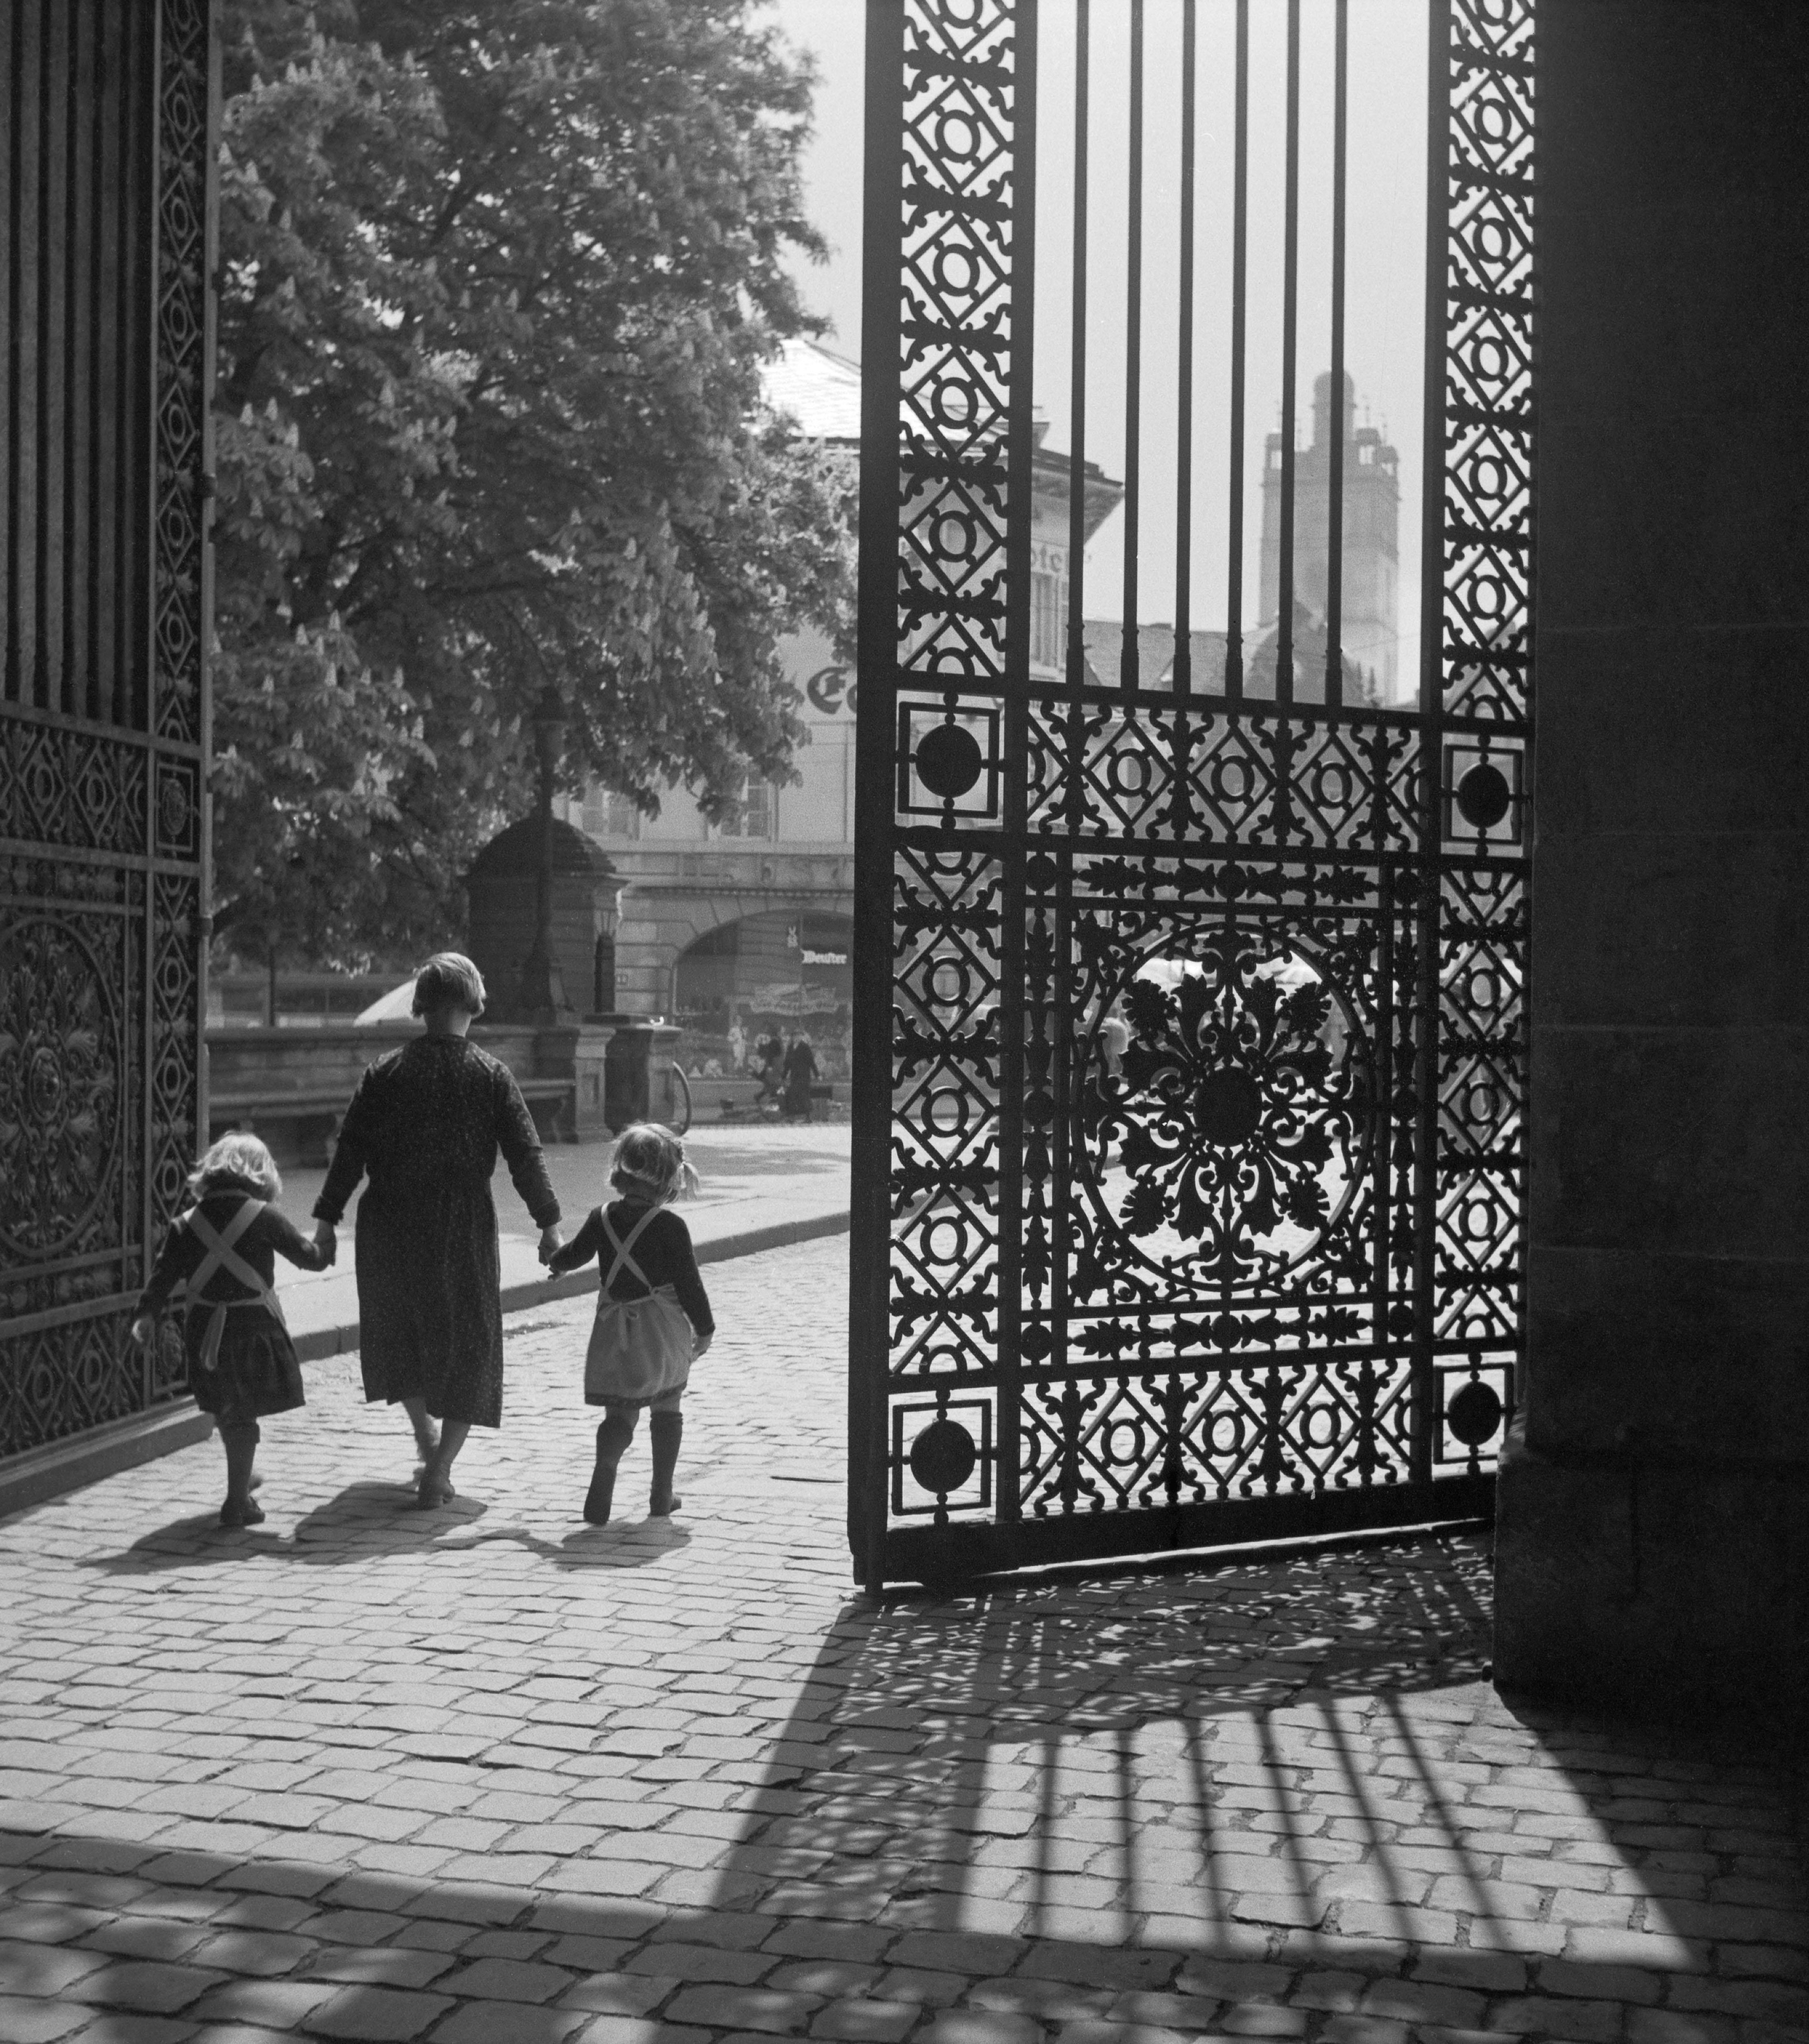 Entrance gate Darmstadt castle girls and woman, Germany 1938 Printed Later 